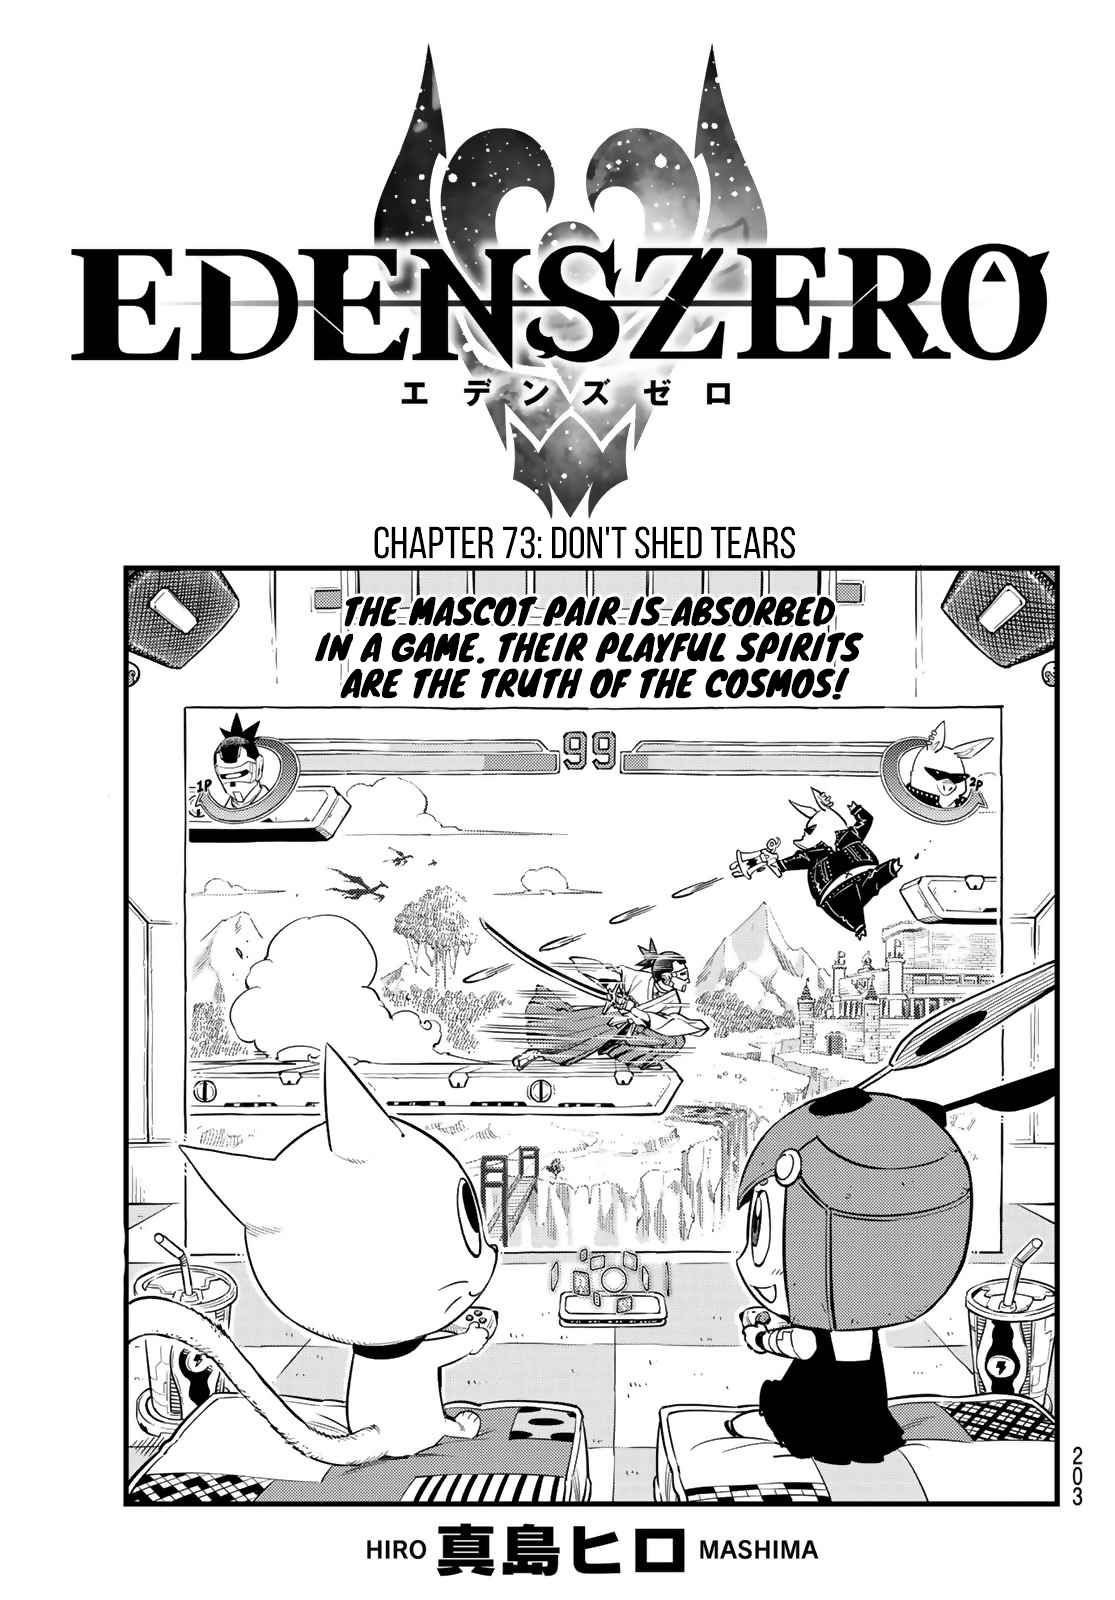 Edens Zero Ch. 73 Don’t Shed Tears